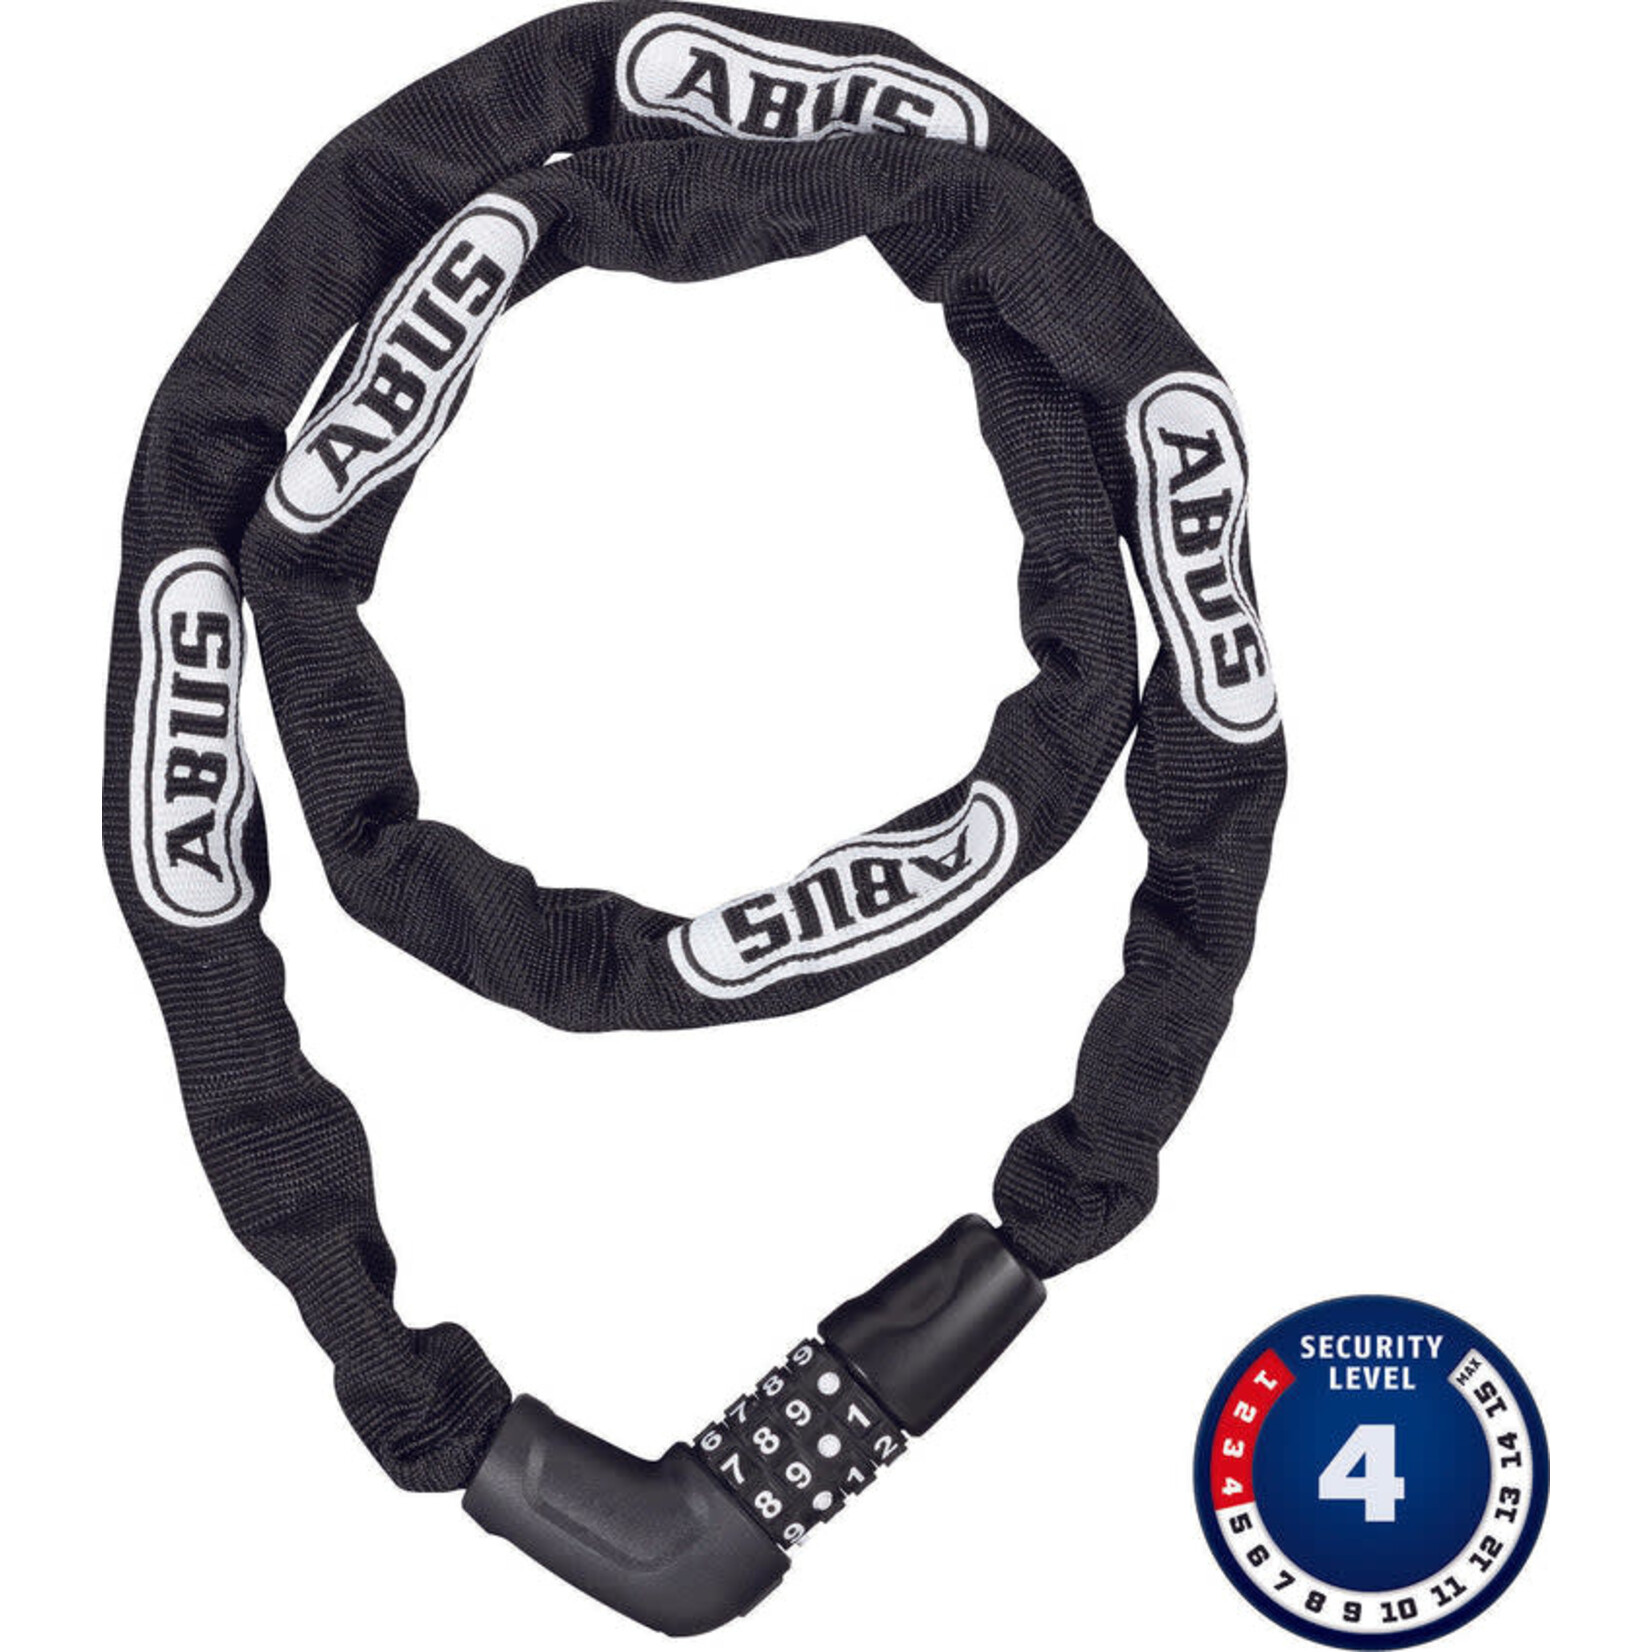 Abus Abus, Steel-O-Chain 5805C Chain with combination lock, 5mm x 75cm (5mm x 2.5'), Black